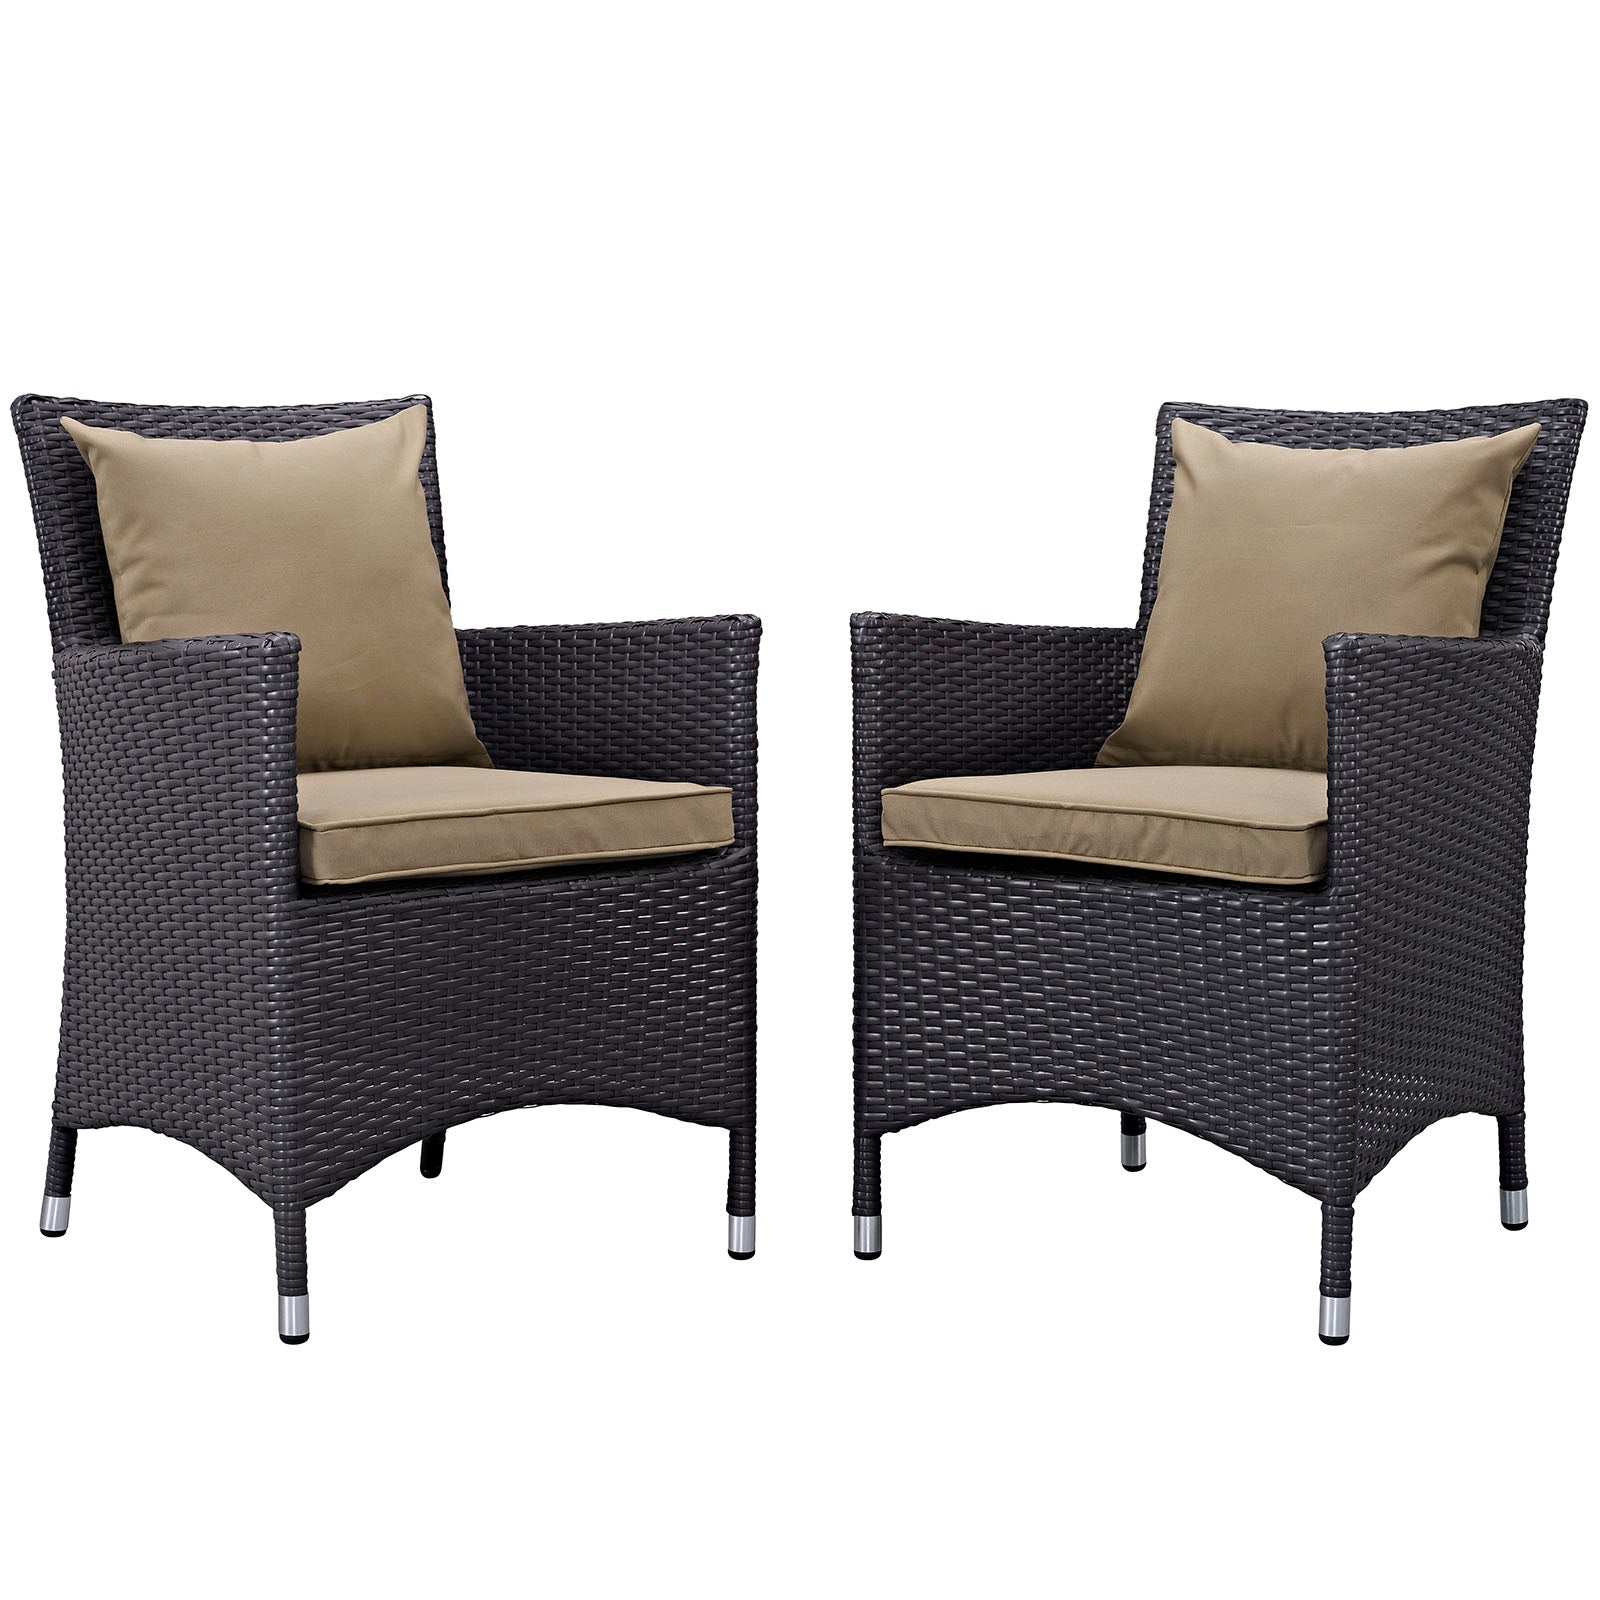 Convene 2 Piece Outdoor Patio Dining Set - East Shore Modern Home Furnishings